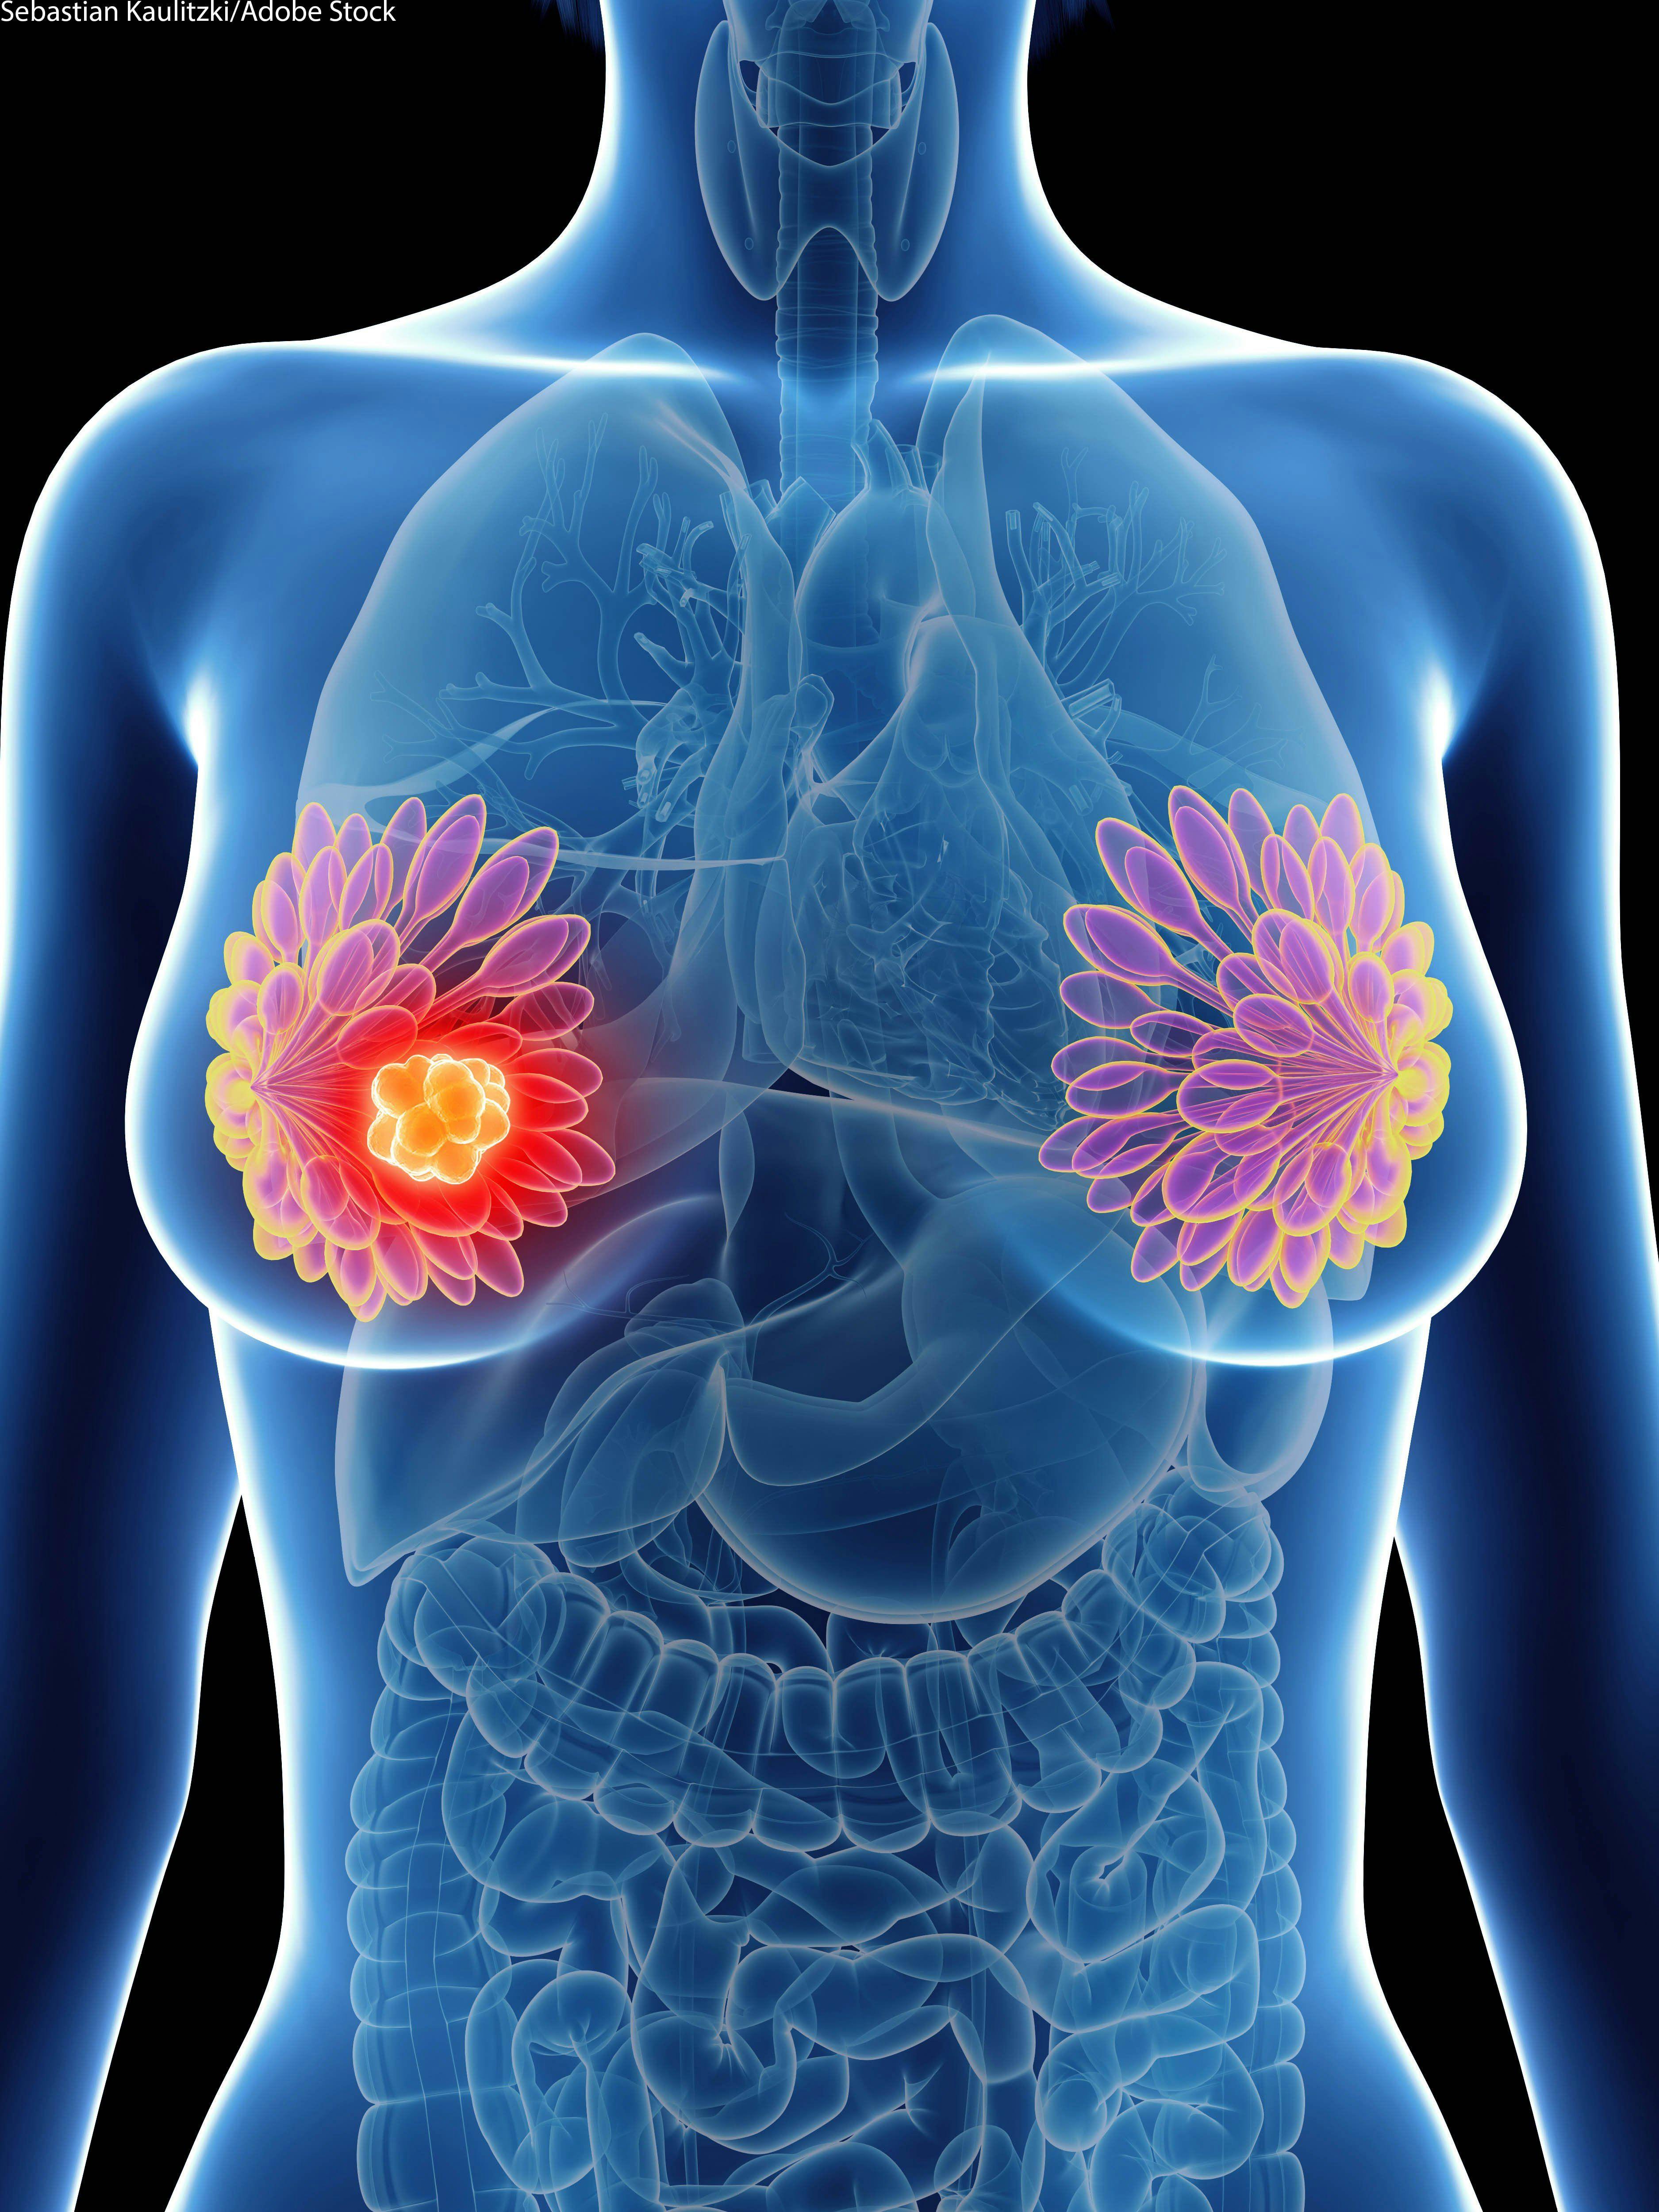 Patients with Invasive Secondary Breast Cancer May Have Higher Mortality